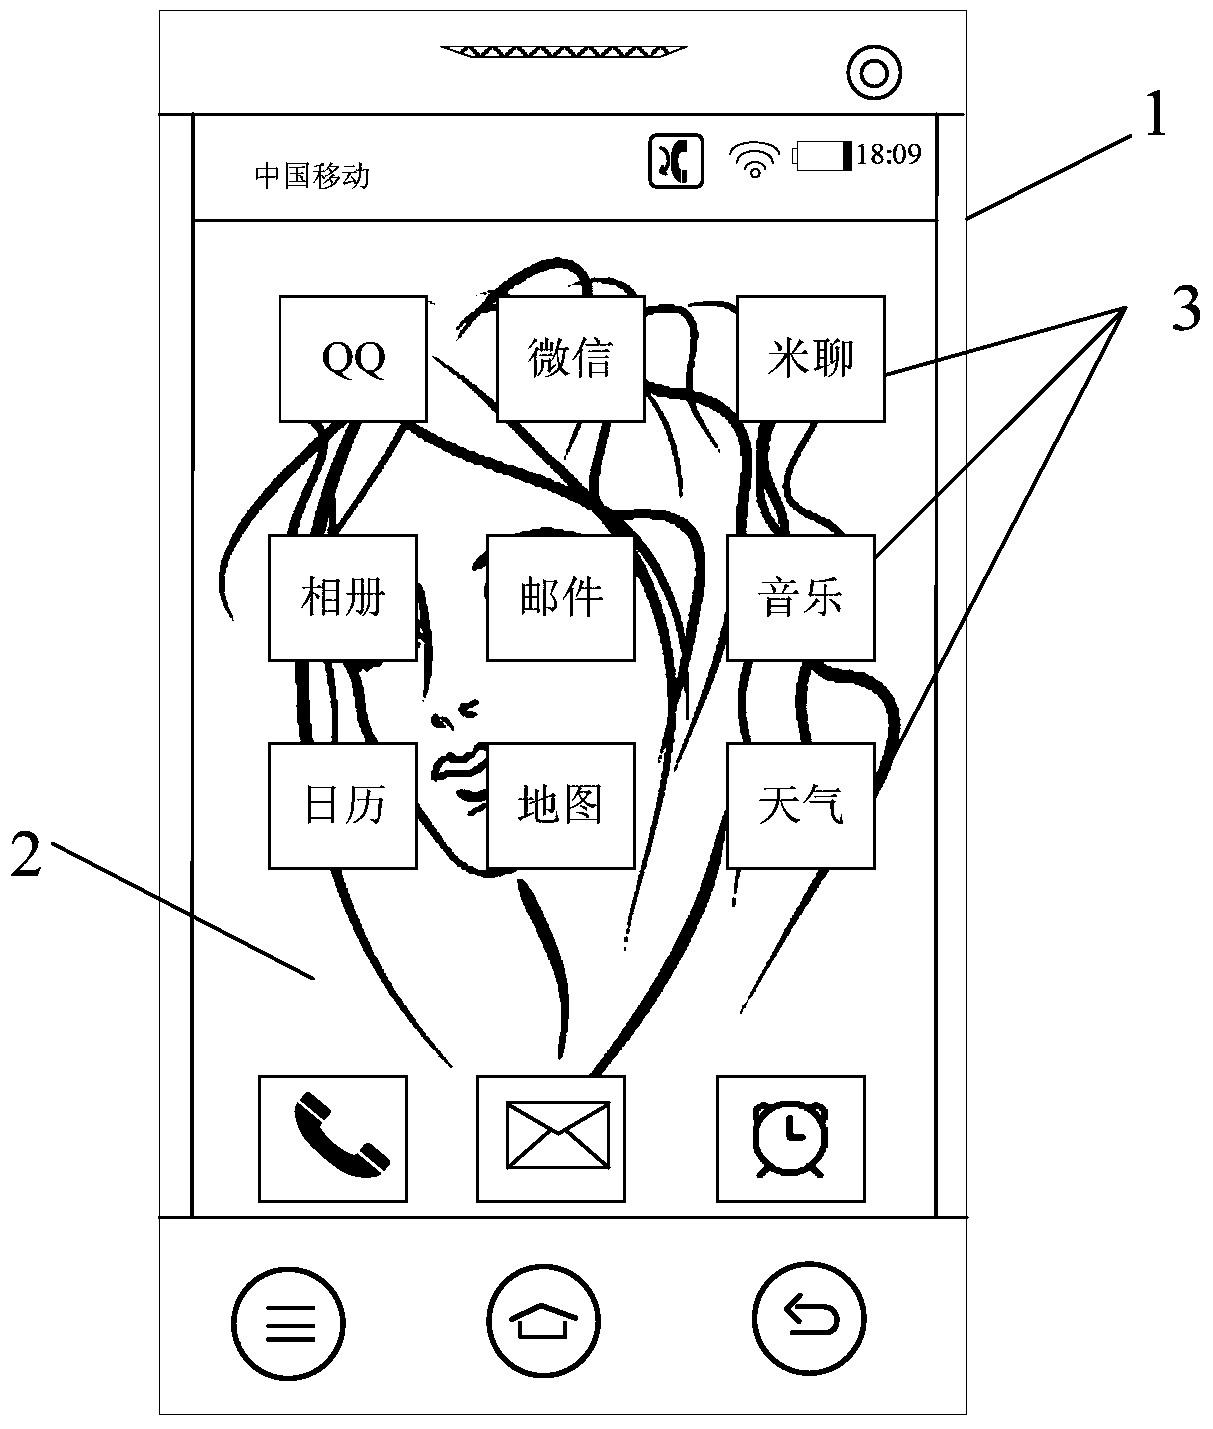 Background image viewing method and device